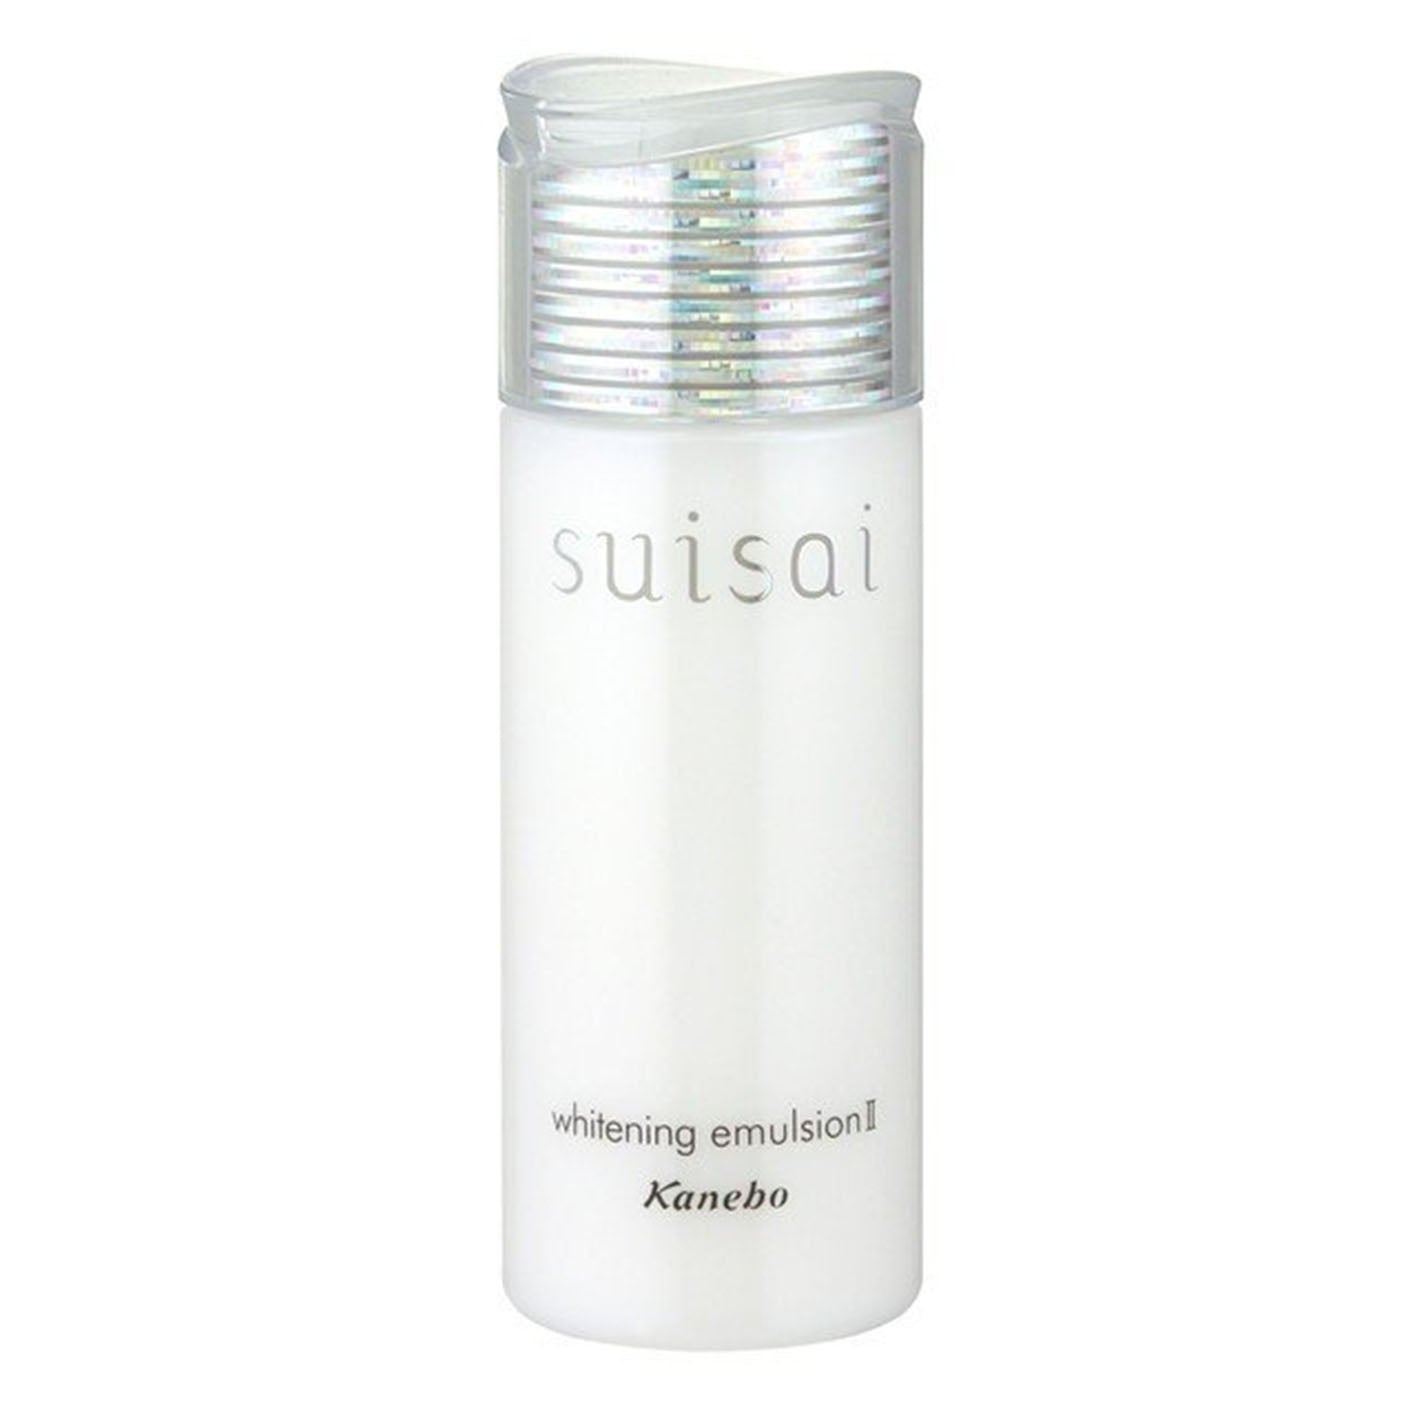 Kanebo Suisai Whitening Emulsion 100ml - Moist - Harajuku Culture Japan - Japanease Products Store Beauty and Stationery